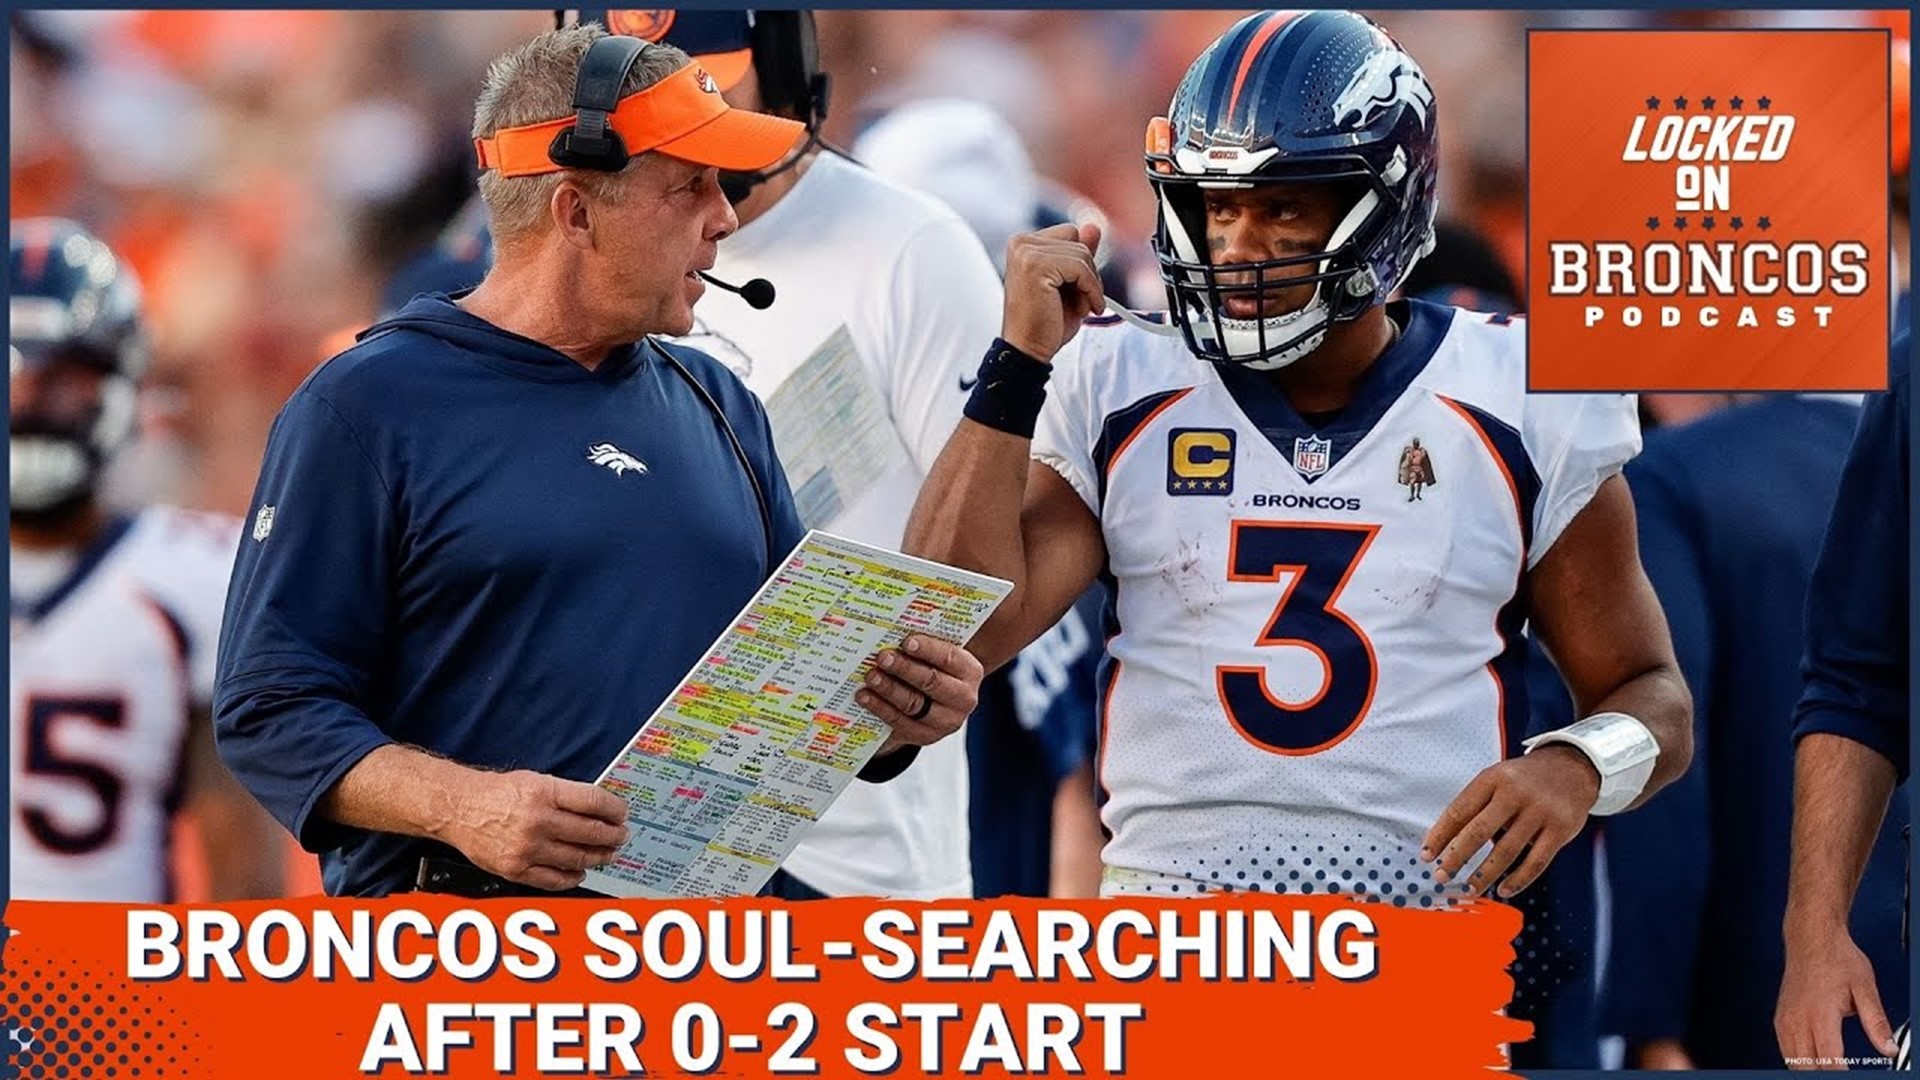 The Denver Broncos are doing some self-searching after an 0-2 start under Sean Payton. What was the message from the Broncos head coach to his players on Monday?